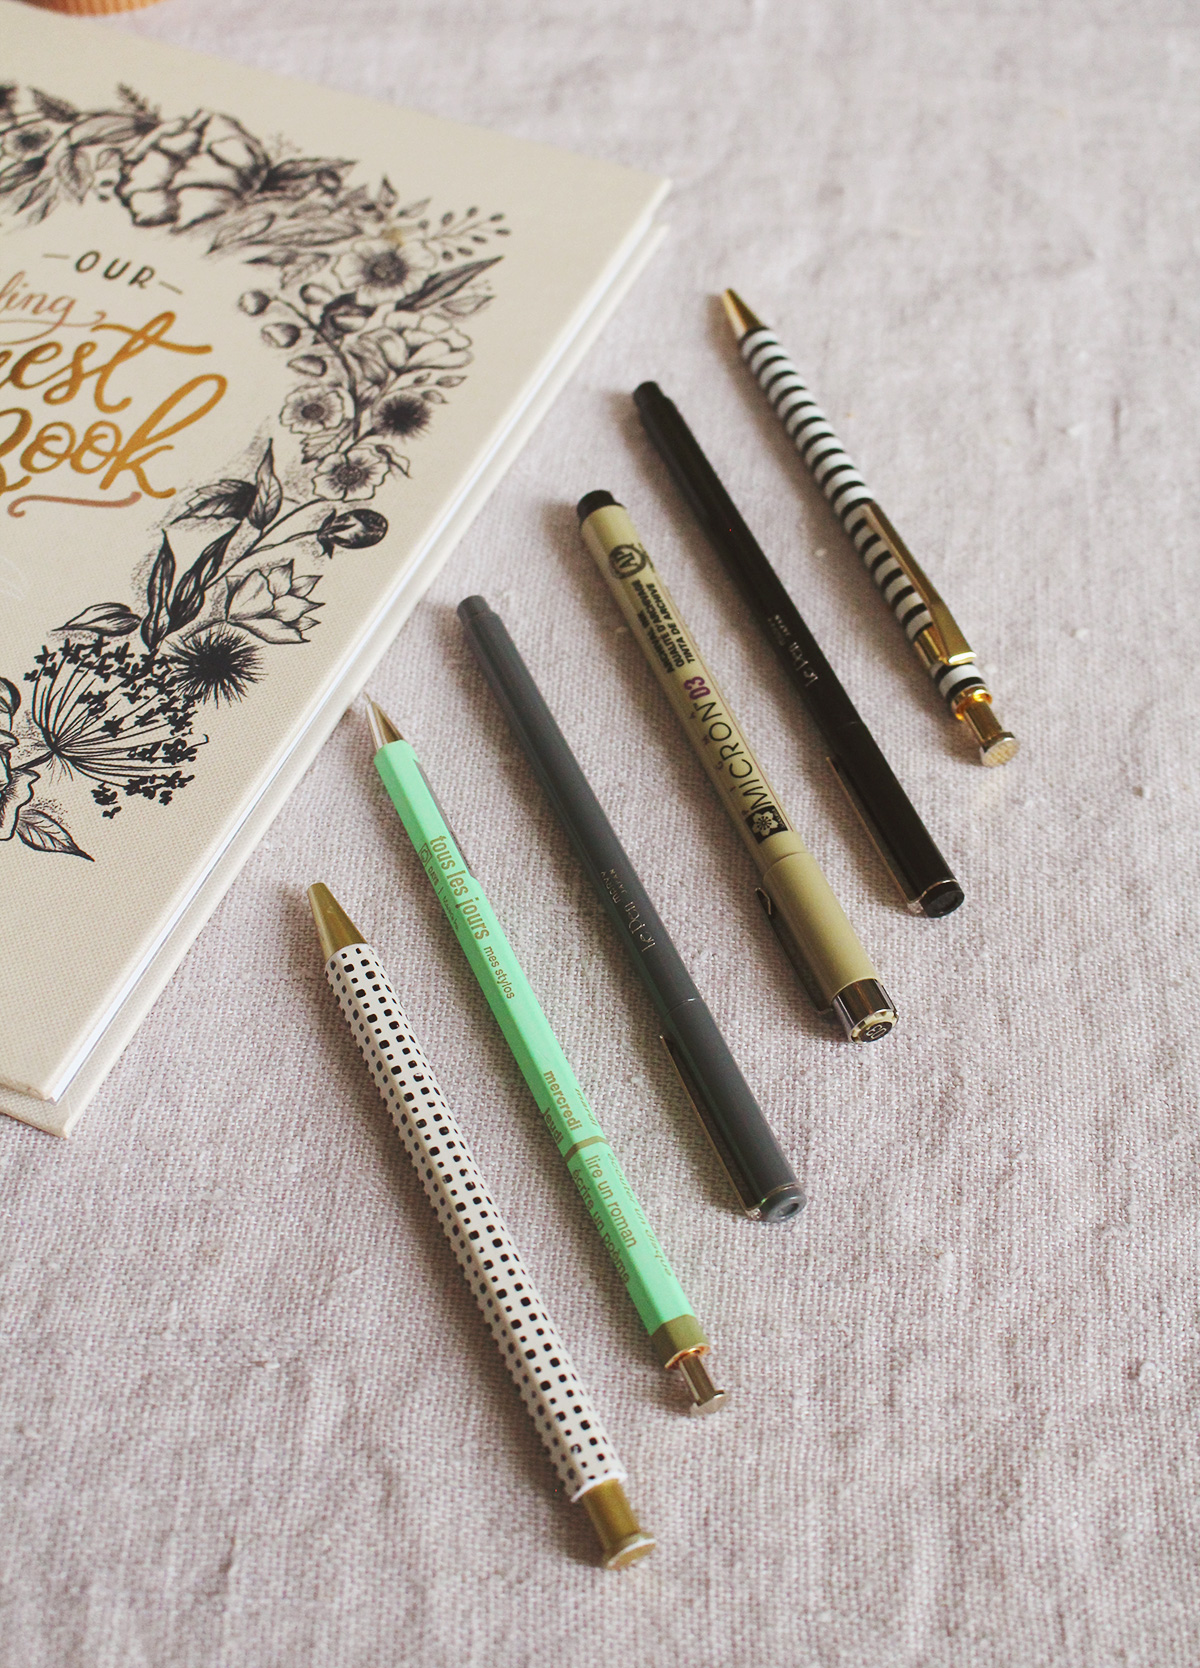 The Best Pens To Use In Your L&V Wedding Guestbook